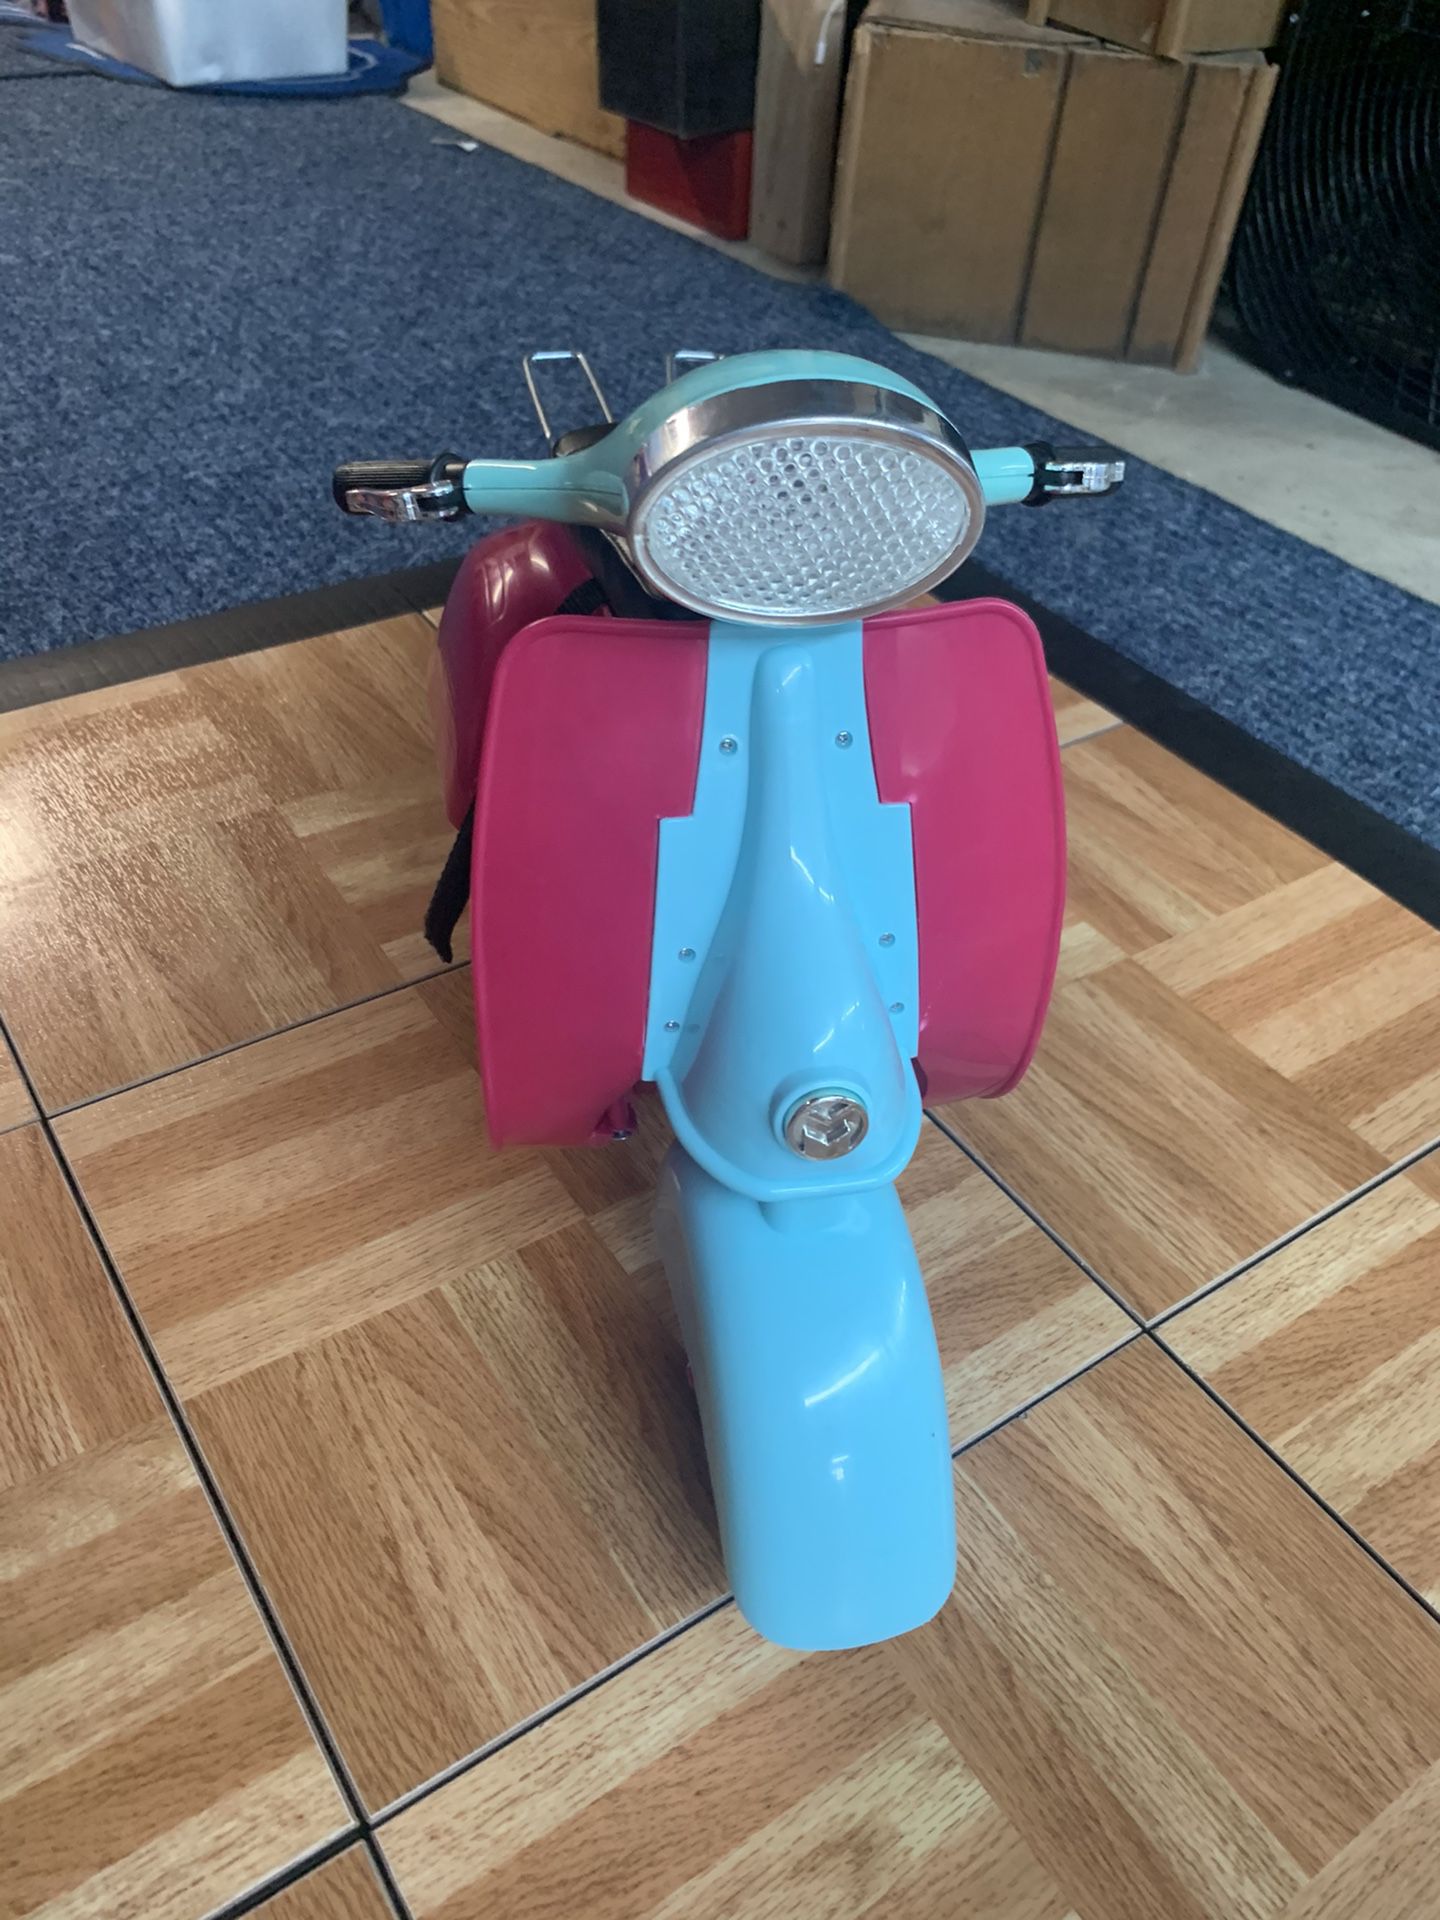 Doll scooter